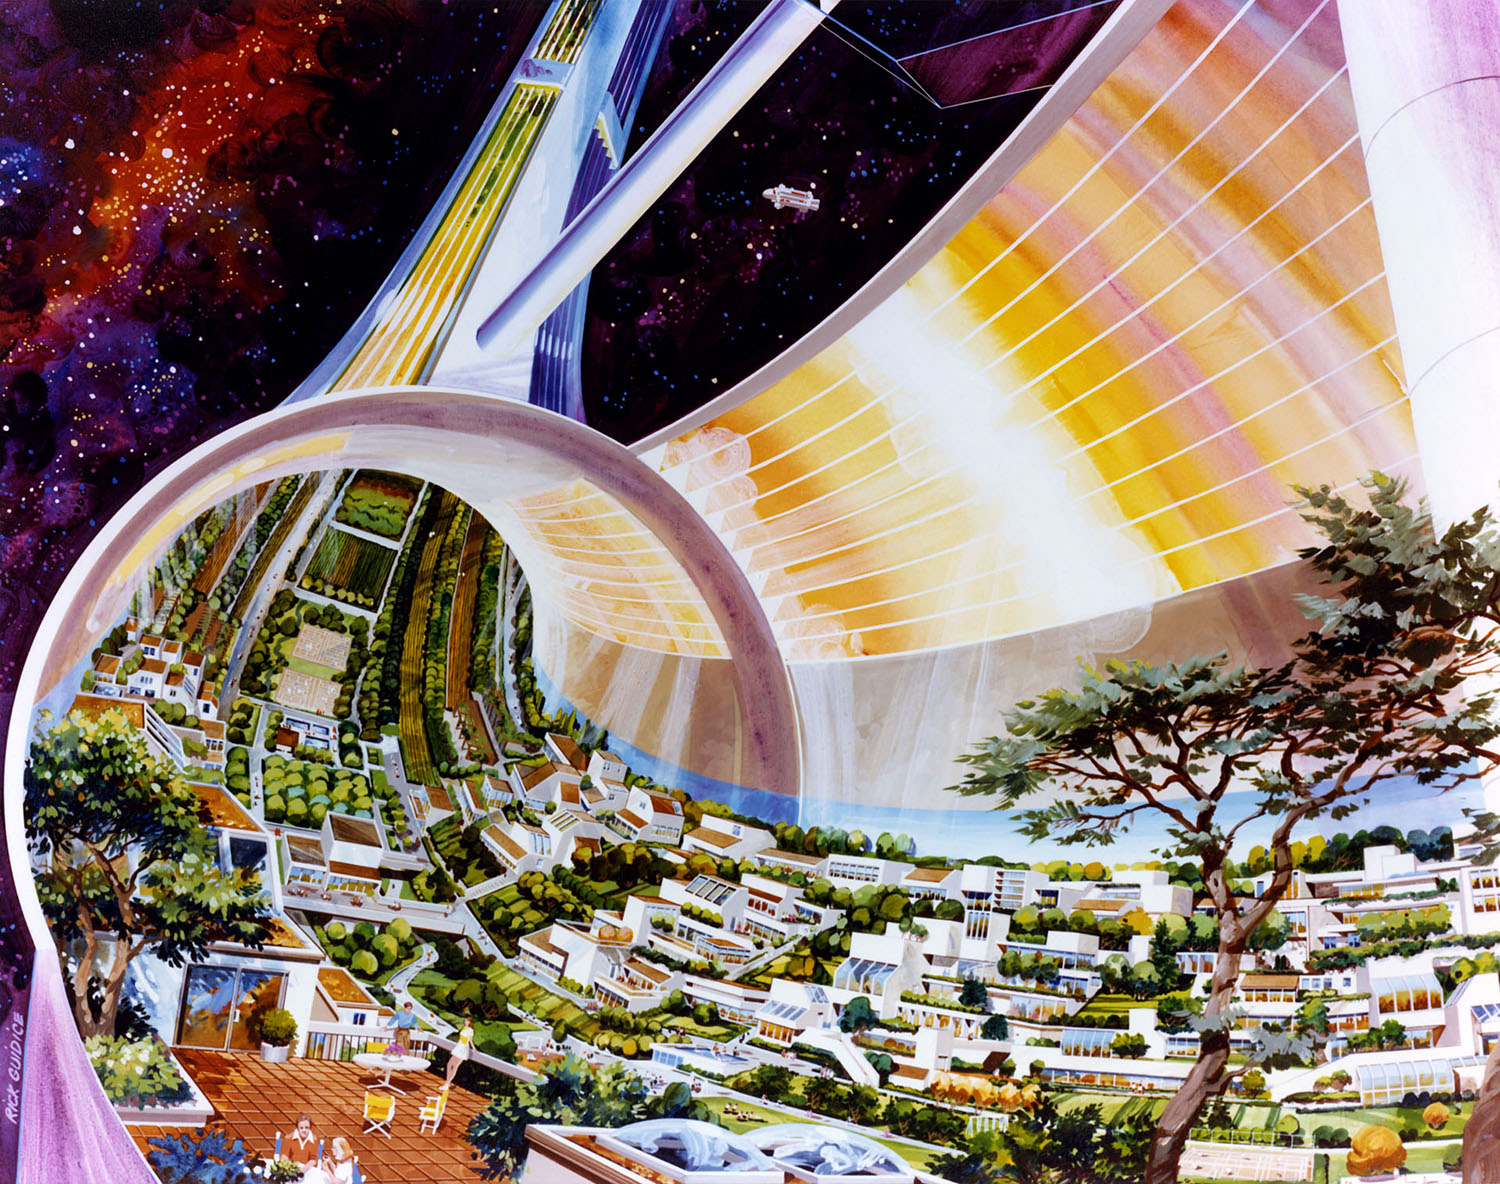 Painting of a torus-shaped space colony, part of the Far Out: Suits, Habs, and Labs for Outer Space show